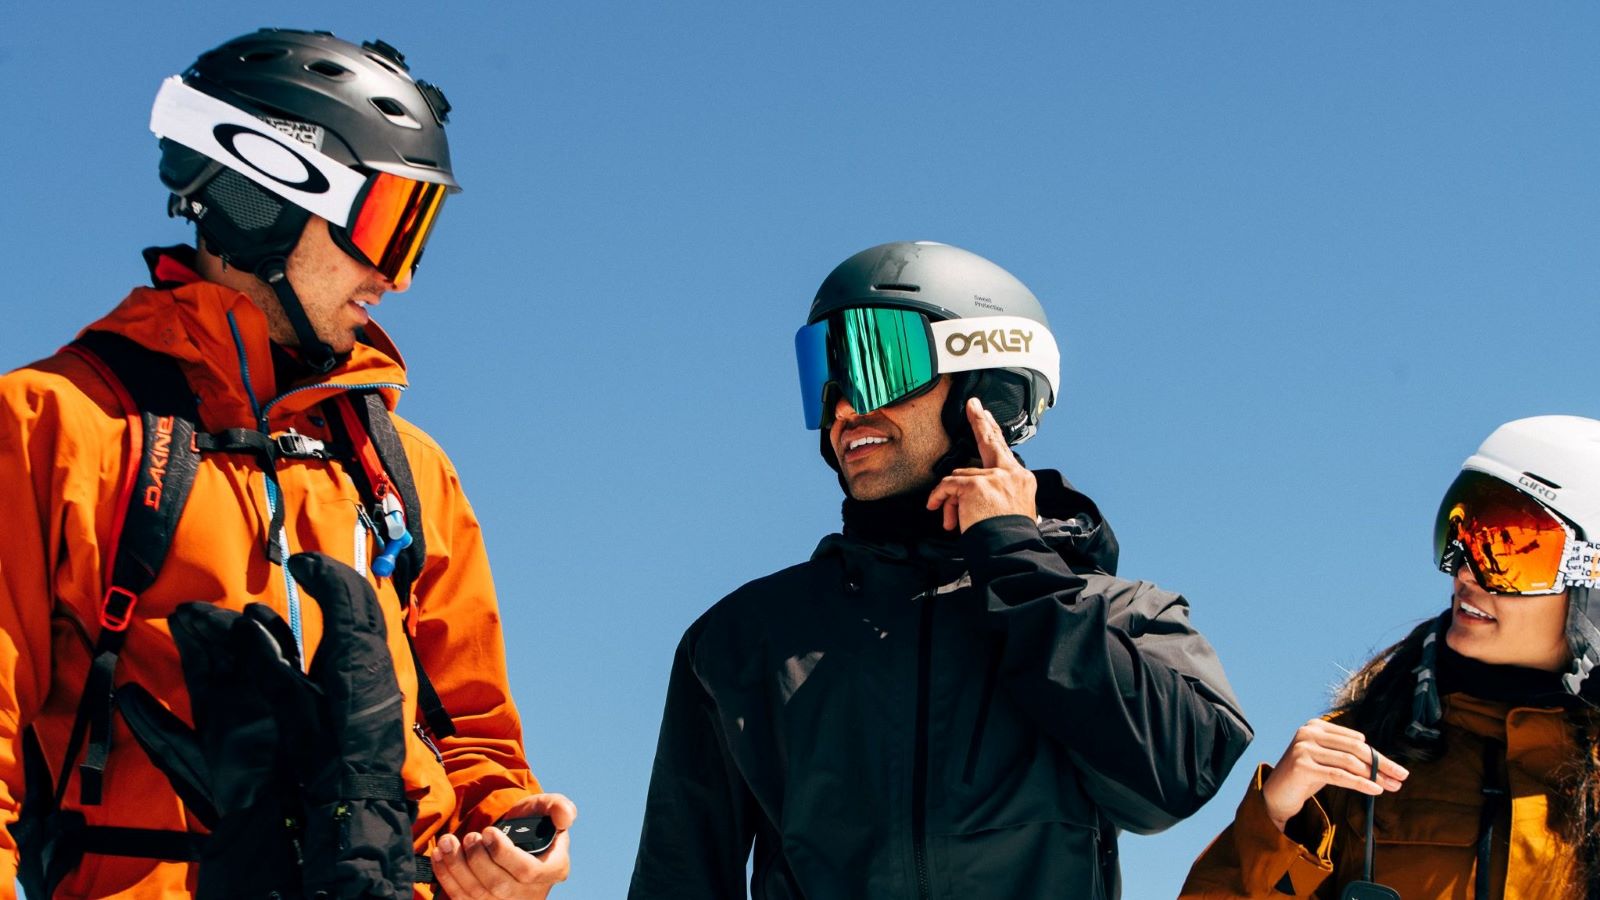 Audio & Communication On The Mountains With Aleck 006 & Go! App -  Boardsport SOURCE